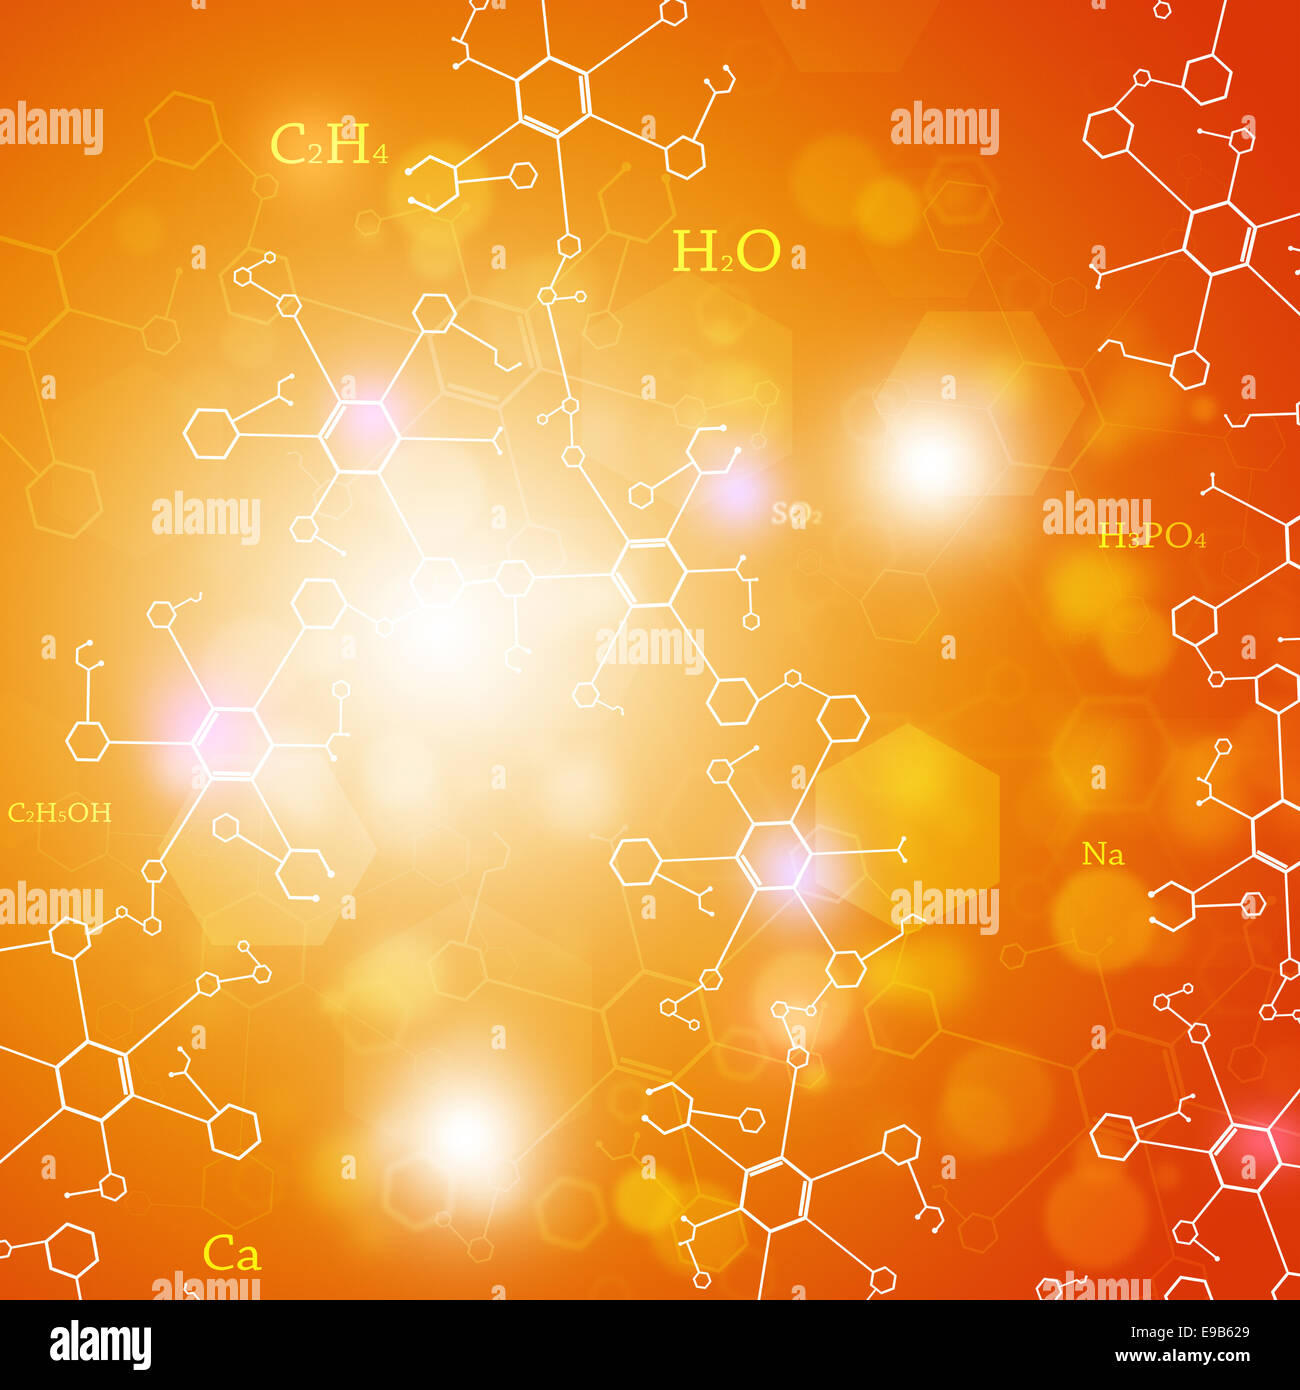 abstract technology and science background with chemistry elements Stock Photo